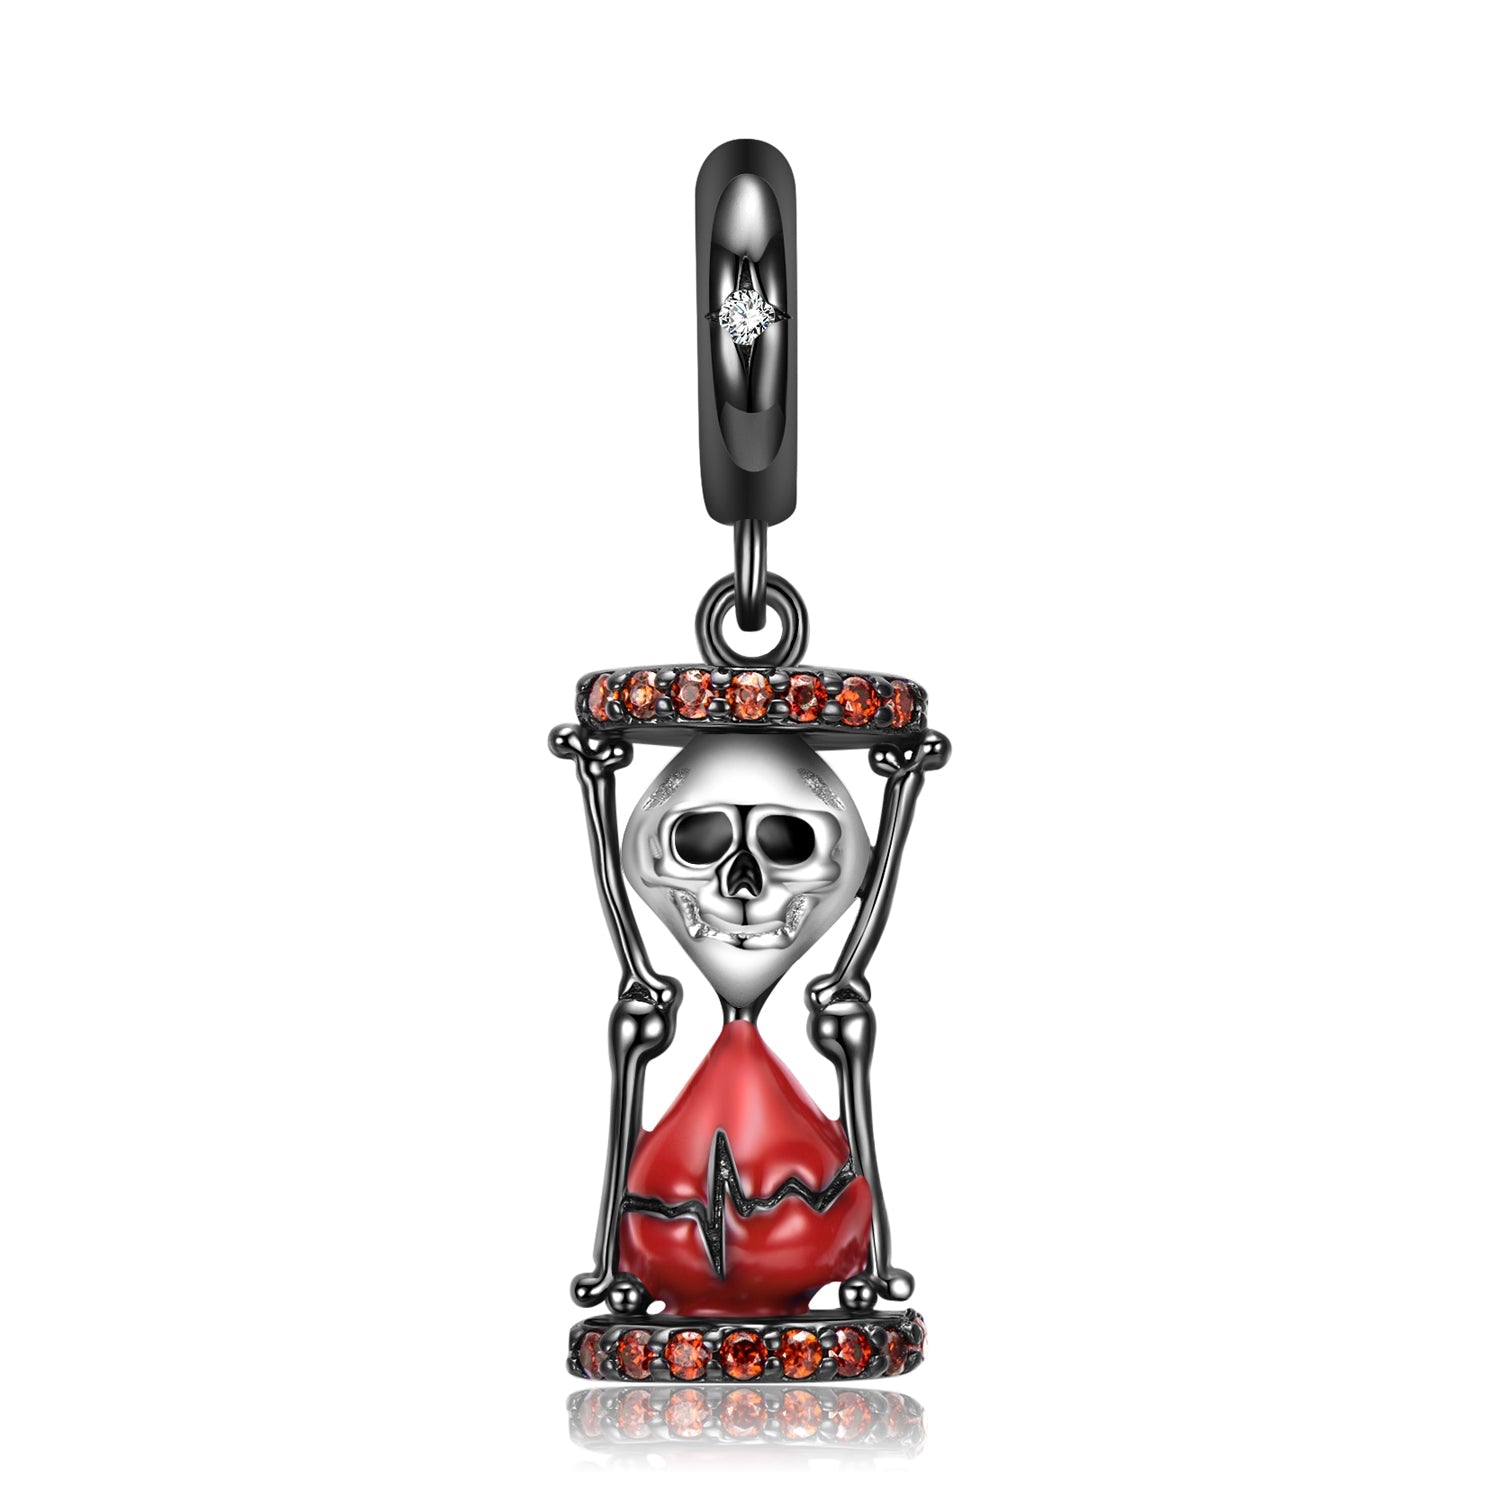 Skull hourglass with heartbeat